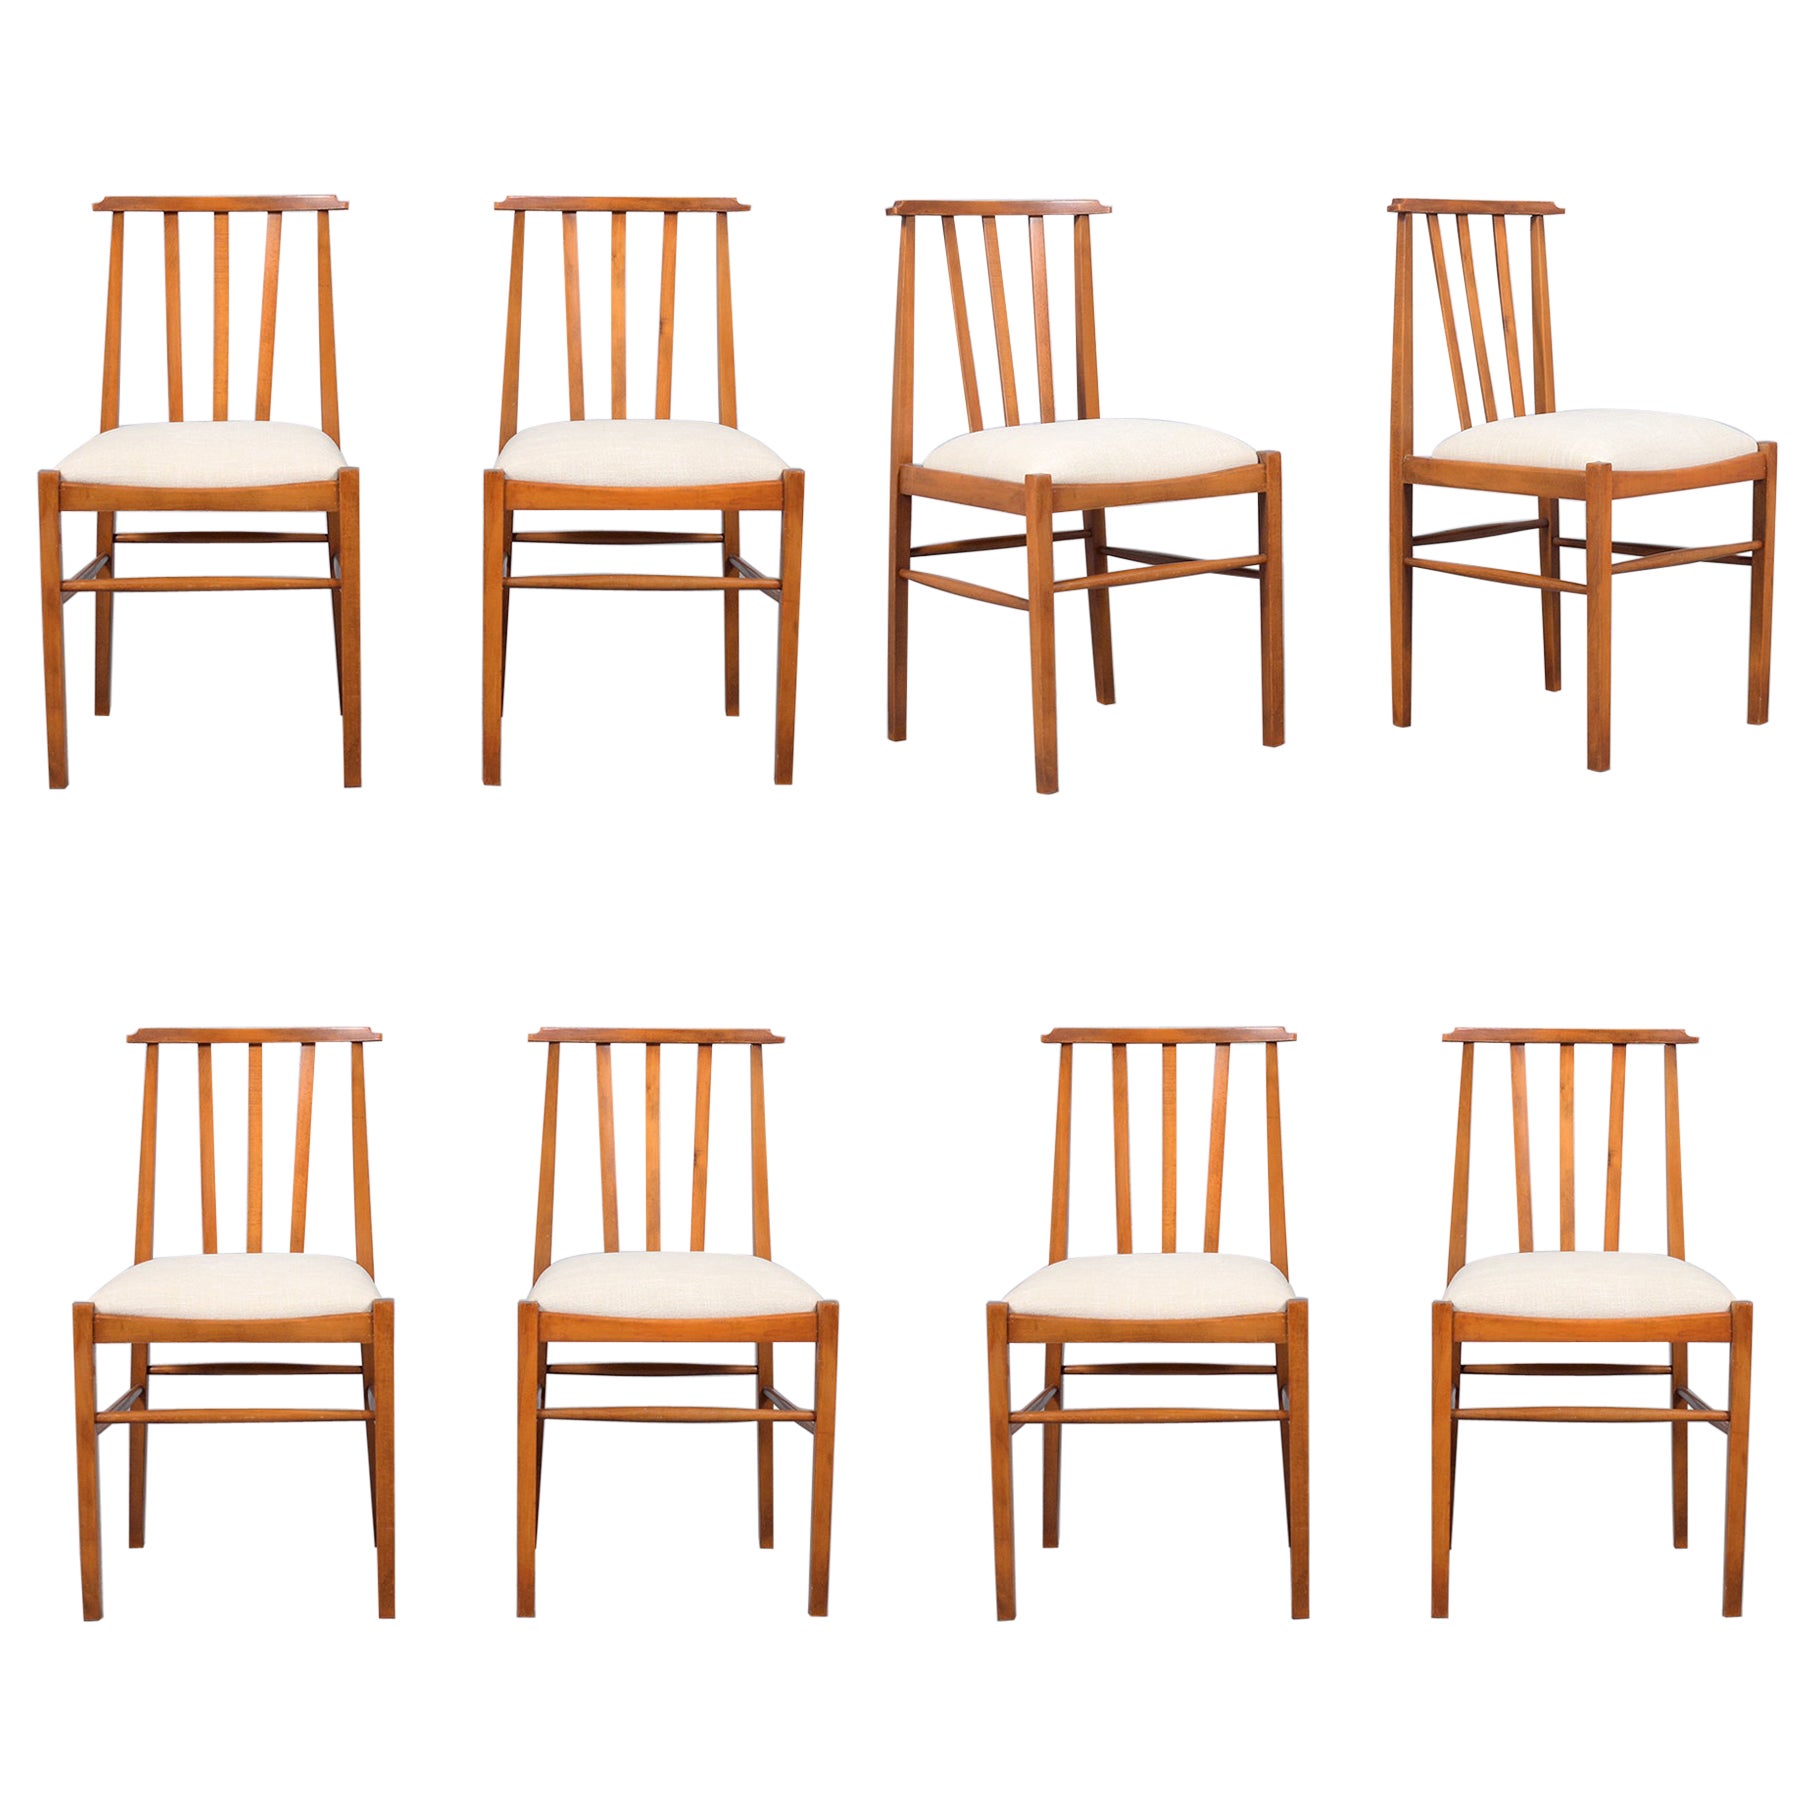 1960s Vintage Modern Dining Chairs Set of Eight - Expertly Restored